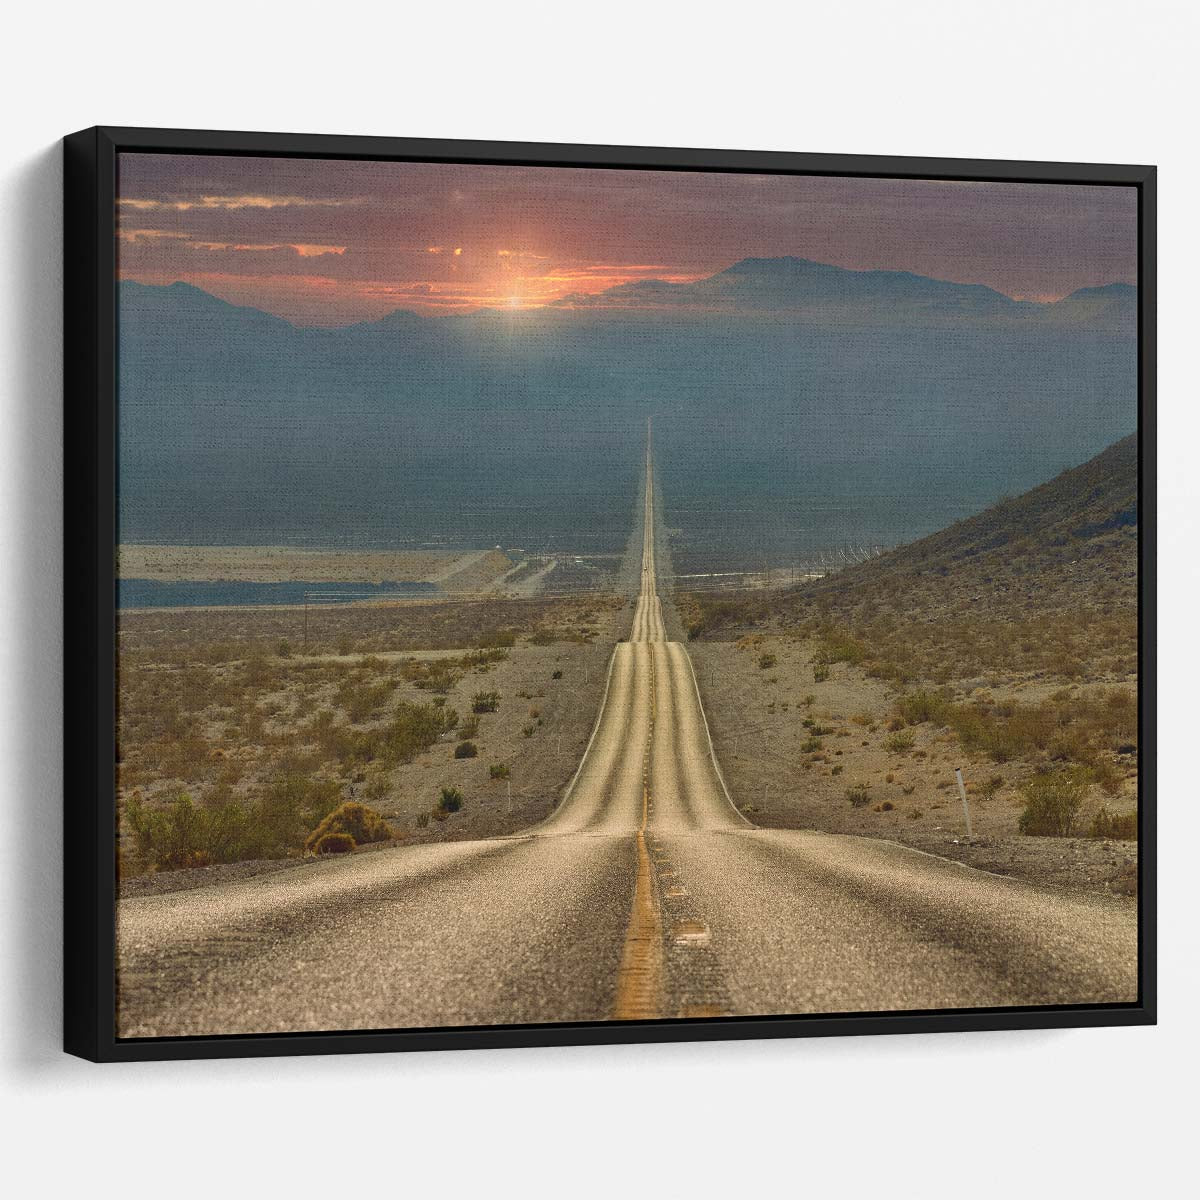 Sunset Drive in Mojave Desert Landscape Wall Art by Luxuriance Designs. Made in USA.